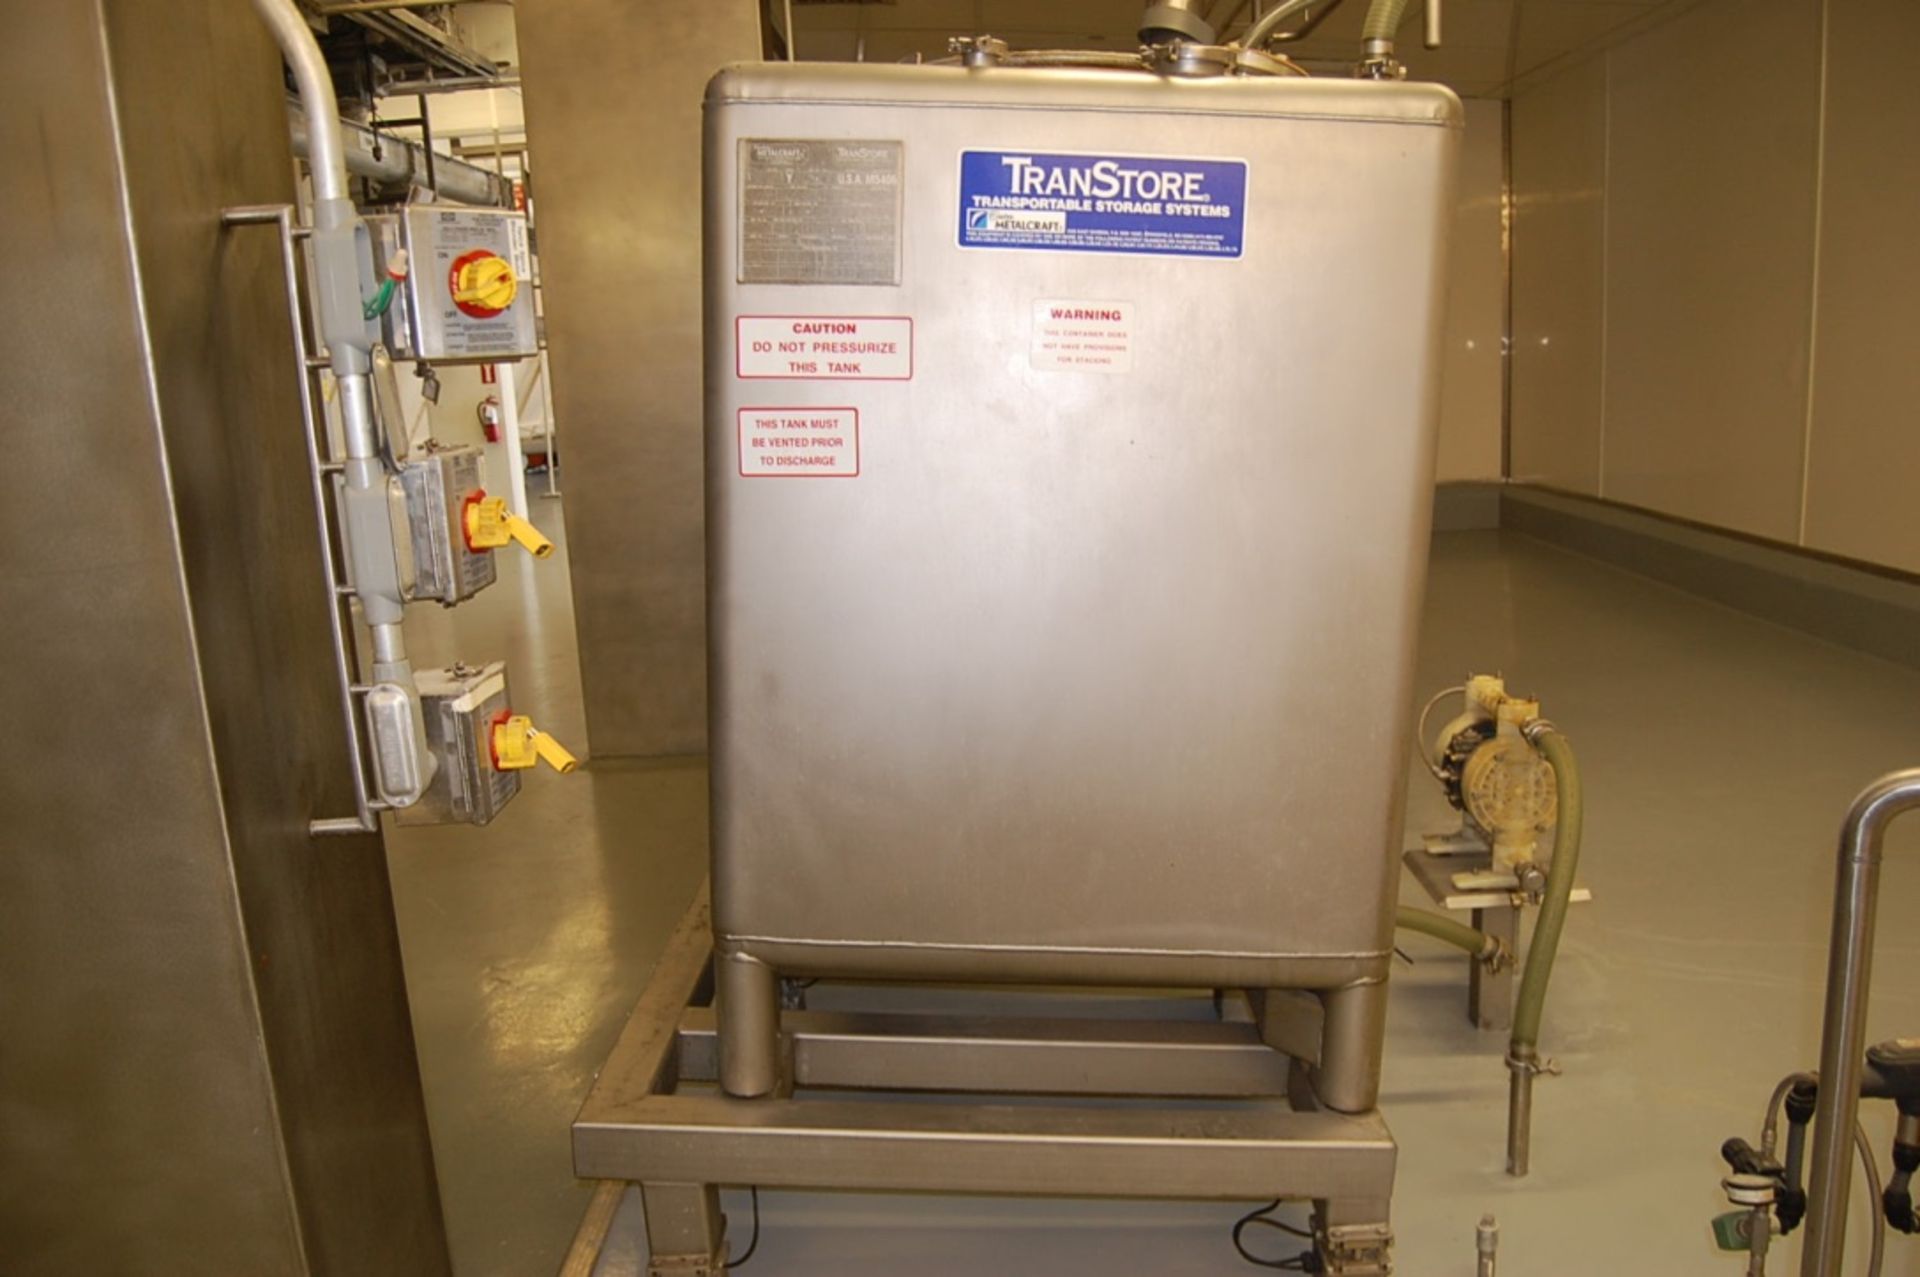 2006 Metalcraft/Transtore Stainless Steel Tank, Model #515408, Rated 395 LOADING FEE: $400 - Image 2 of 2